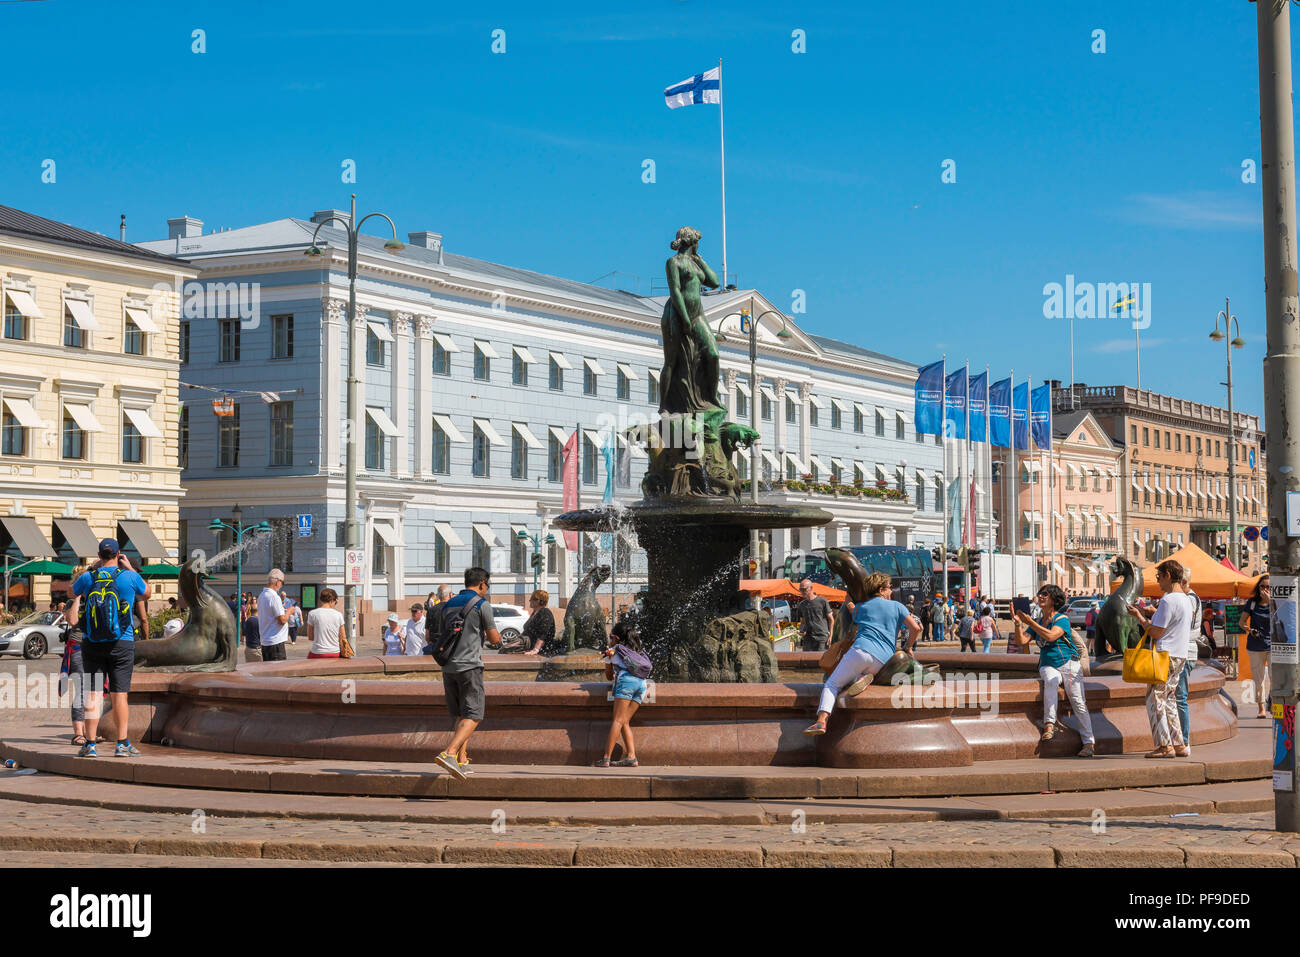 Helsinki Market Square, view of the Havis Amanda fountain and Town Hall building sited in the Market Square (Kauppatori) Helsinki, Finland. Stock Photo